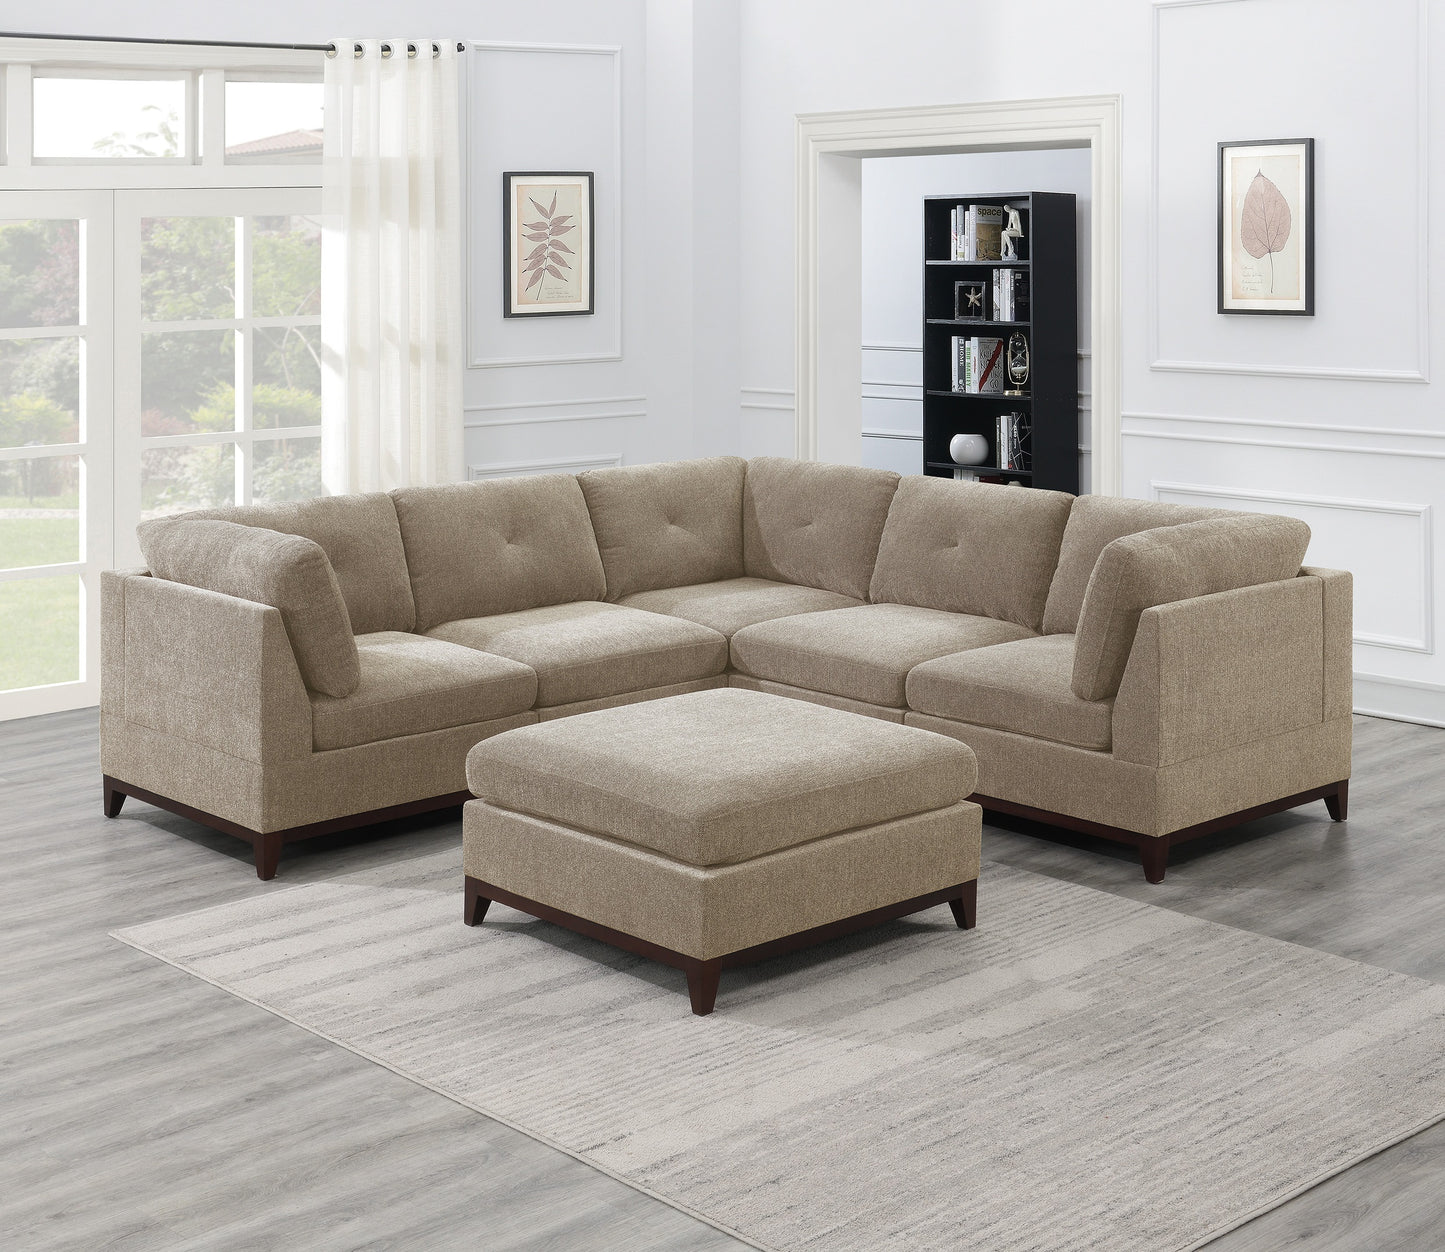 Camel Chenille Fabric Modular Sectional 6pc Set Living Room Furniture Corner Sectional Couch 3x Corner Wedge 2x Armless Chairs and 1x Ottoman Tufted Back - Enova Luxe Home Store